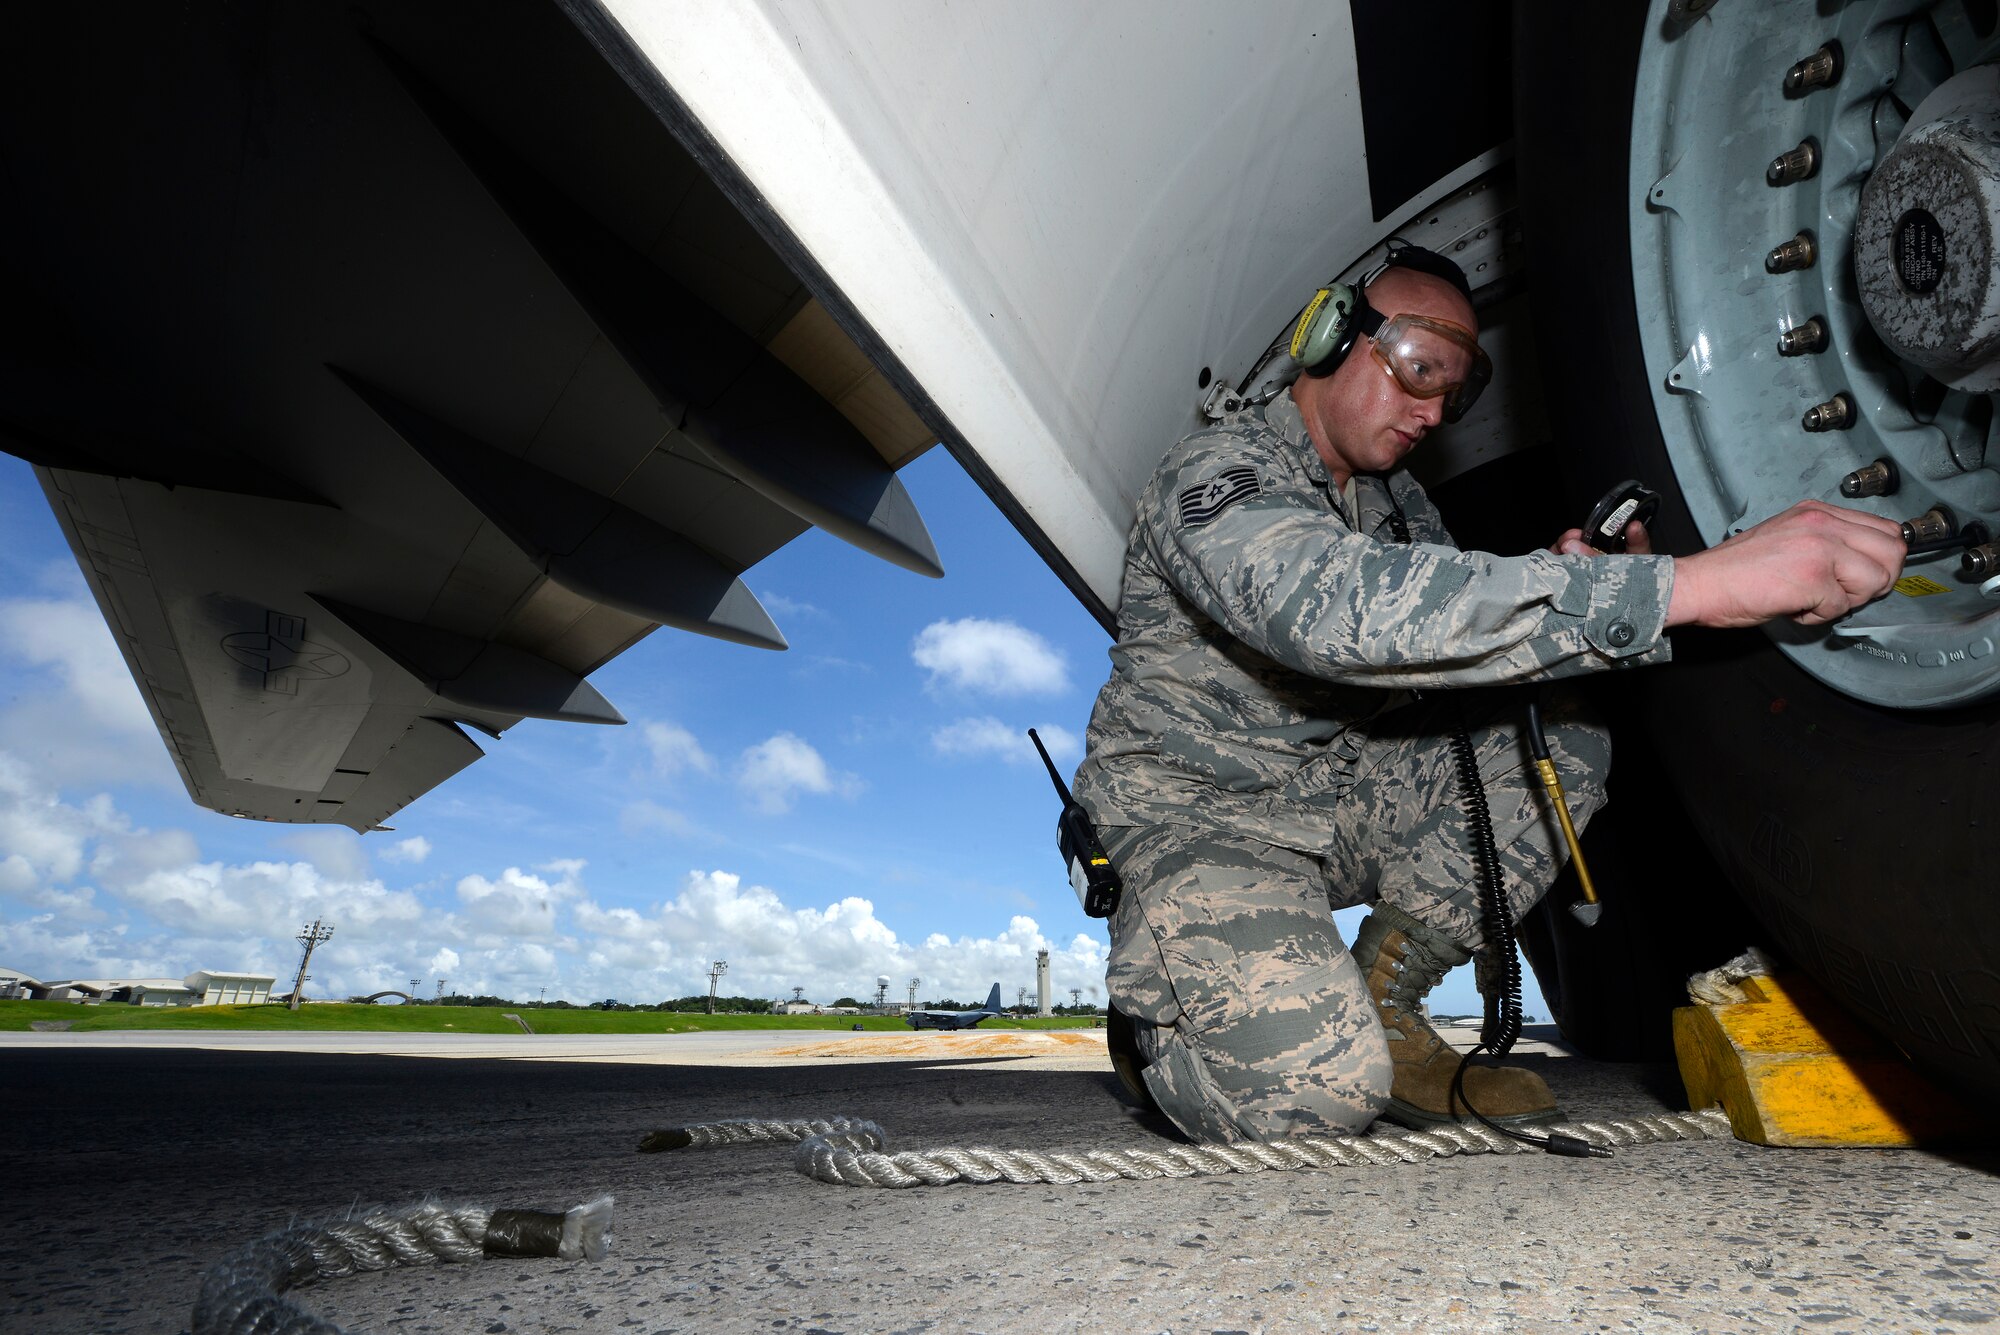 U.S. Air Force Tech. Sgt. David Williamson, 733rd Air Mobility Squadon, checks the air pressure in the tire of a 36th Airlift Squadron C-17 Globemaster III cargo aircraft on the Kadena Air Base, Japan, flightline June 9, 2015. In addition to the hard work he puts into his Air Force career, Williamson also strives to improve his rap career outside the uniform. (U.S. Air Force photo by Staff Sgt. Maeson L. Elleman)